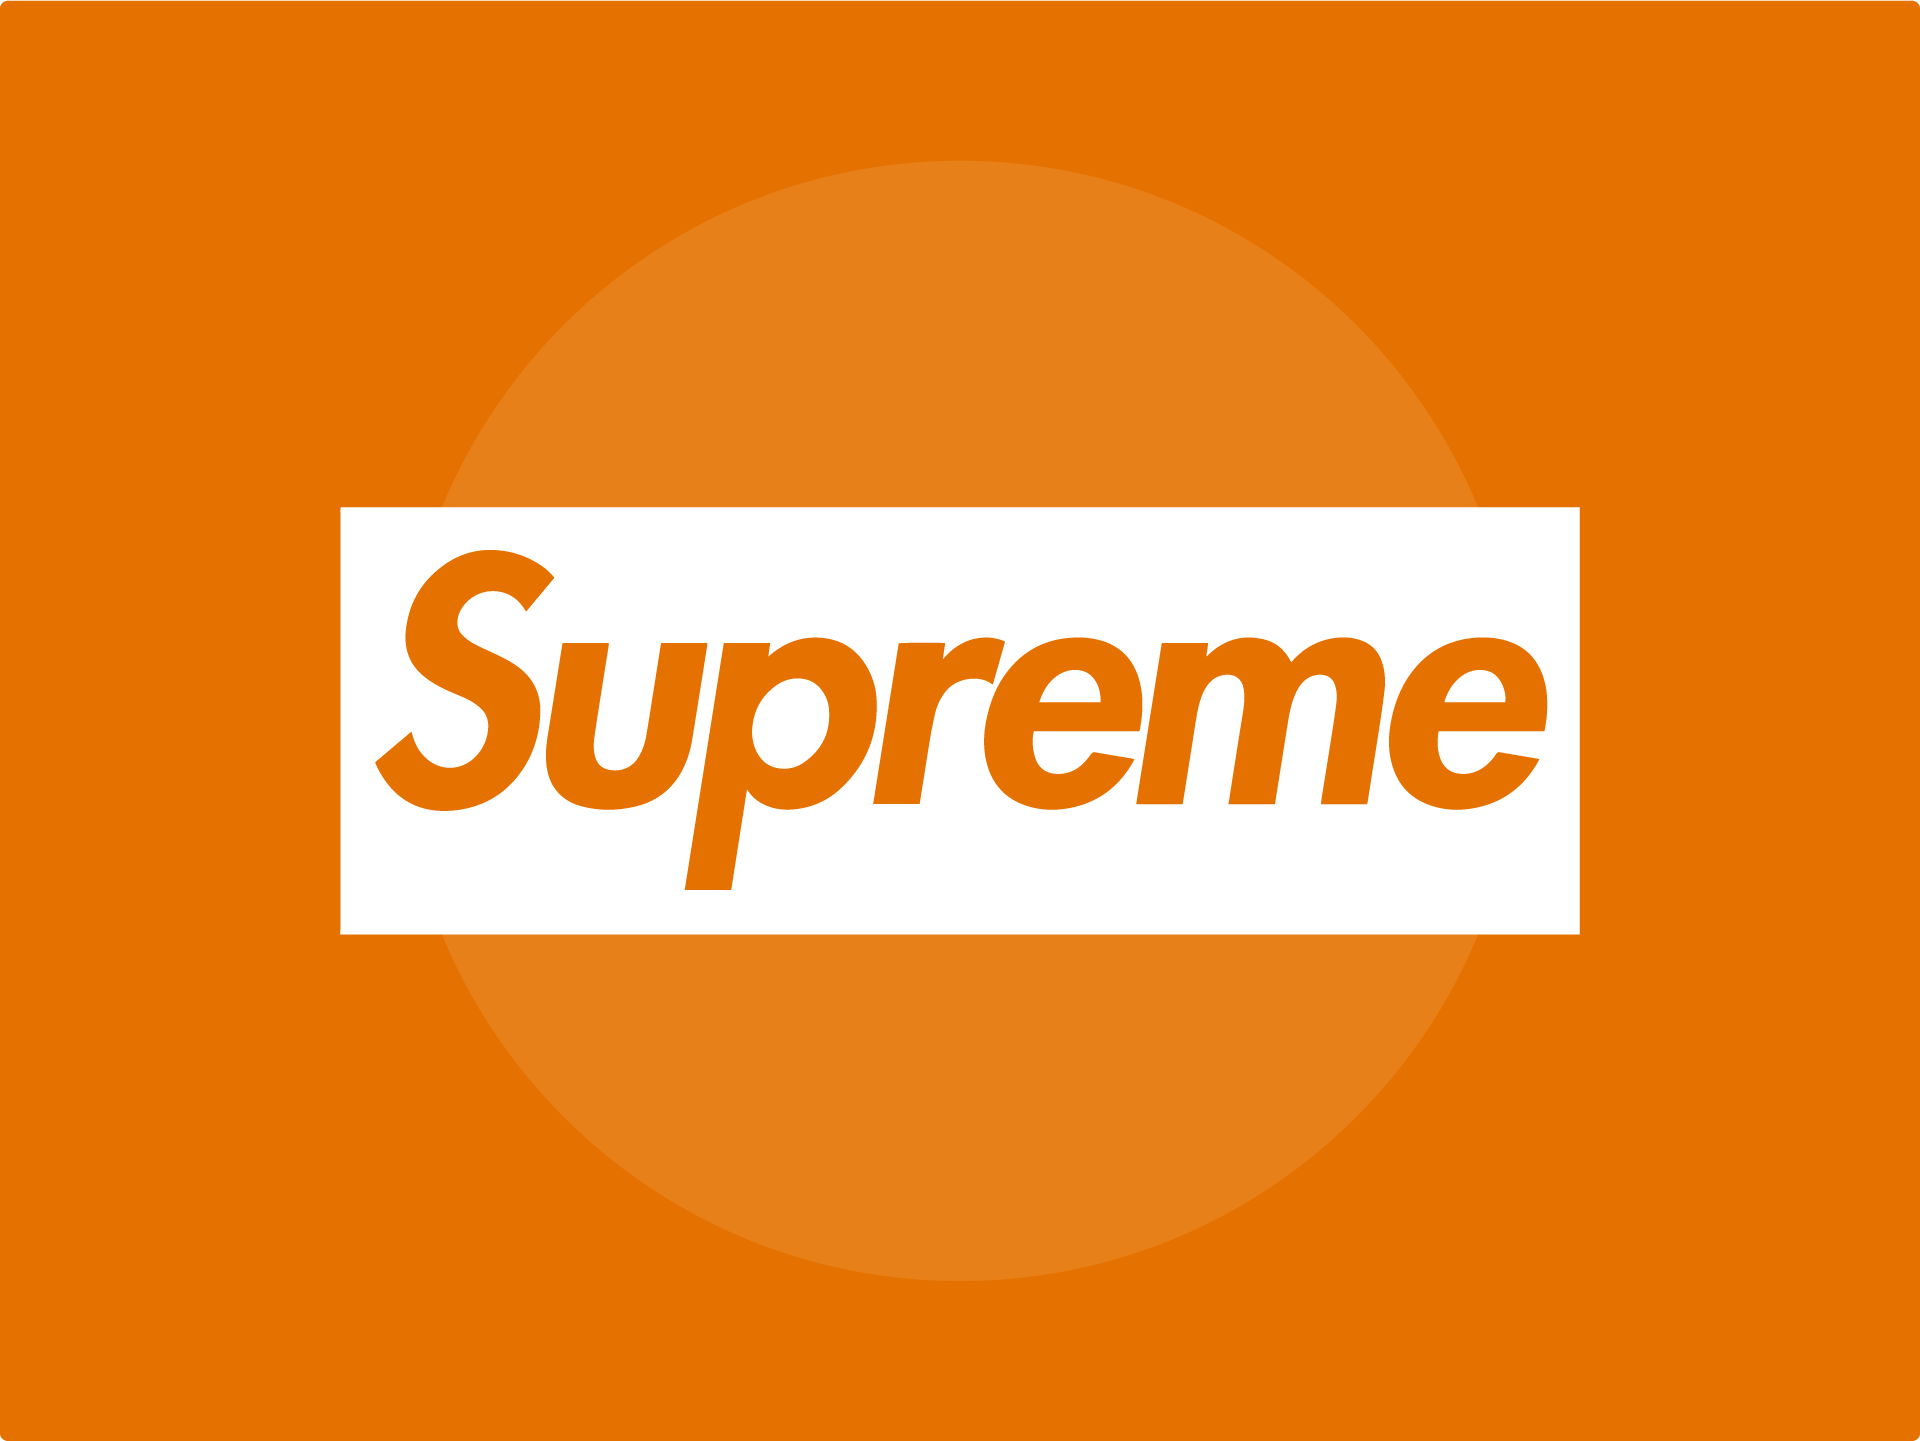 Streetwear brand Supreme acquired by owner of Timberland, Vans